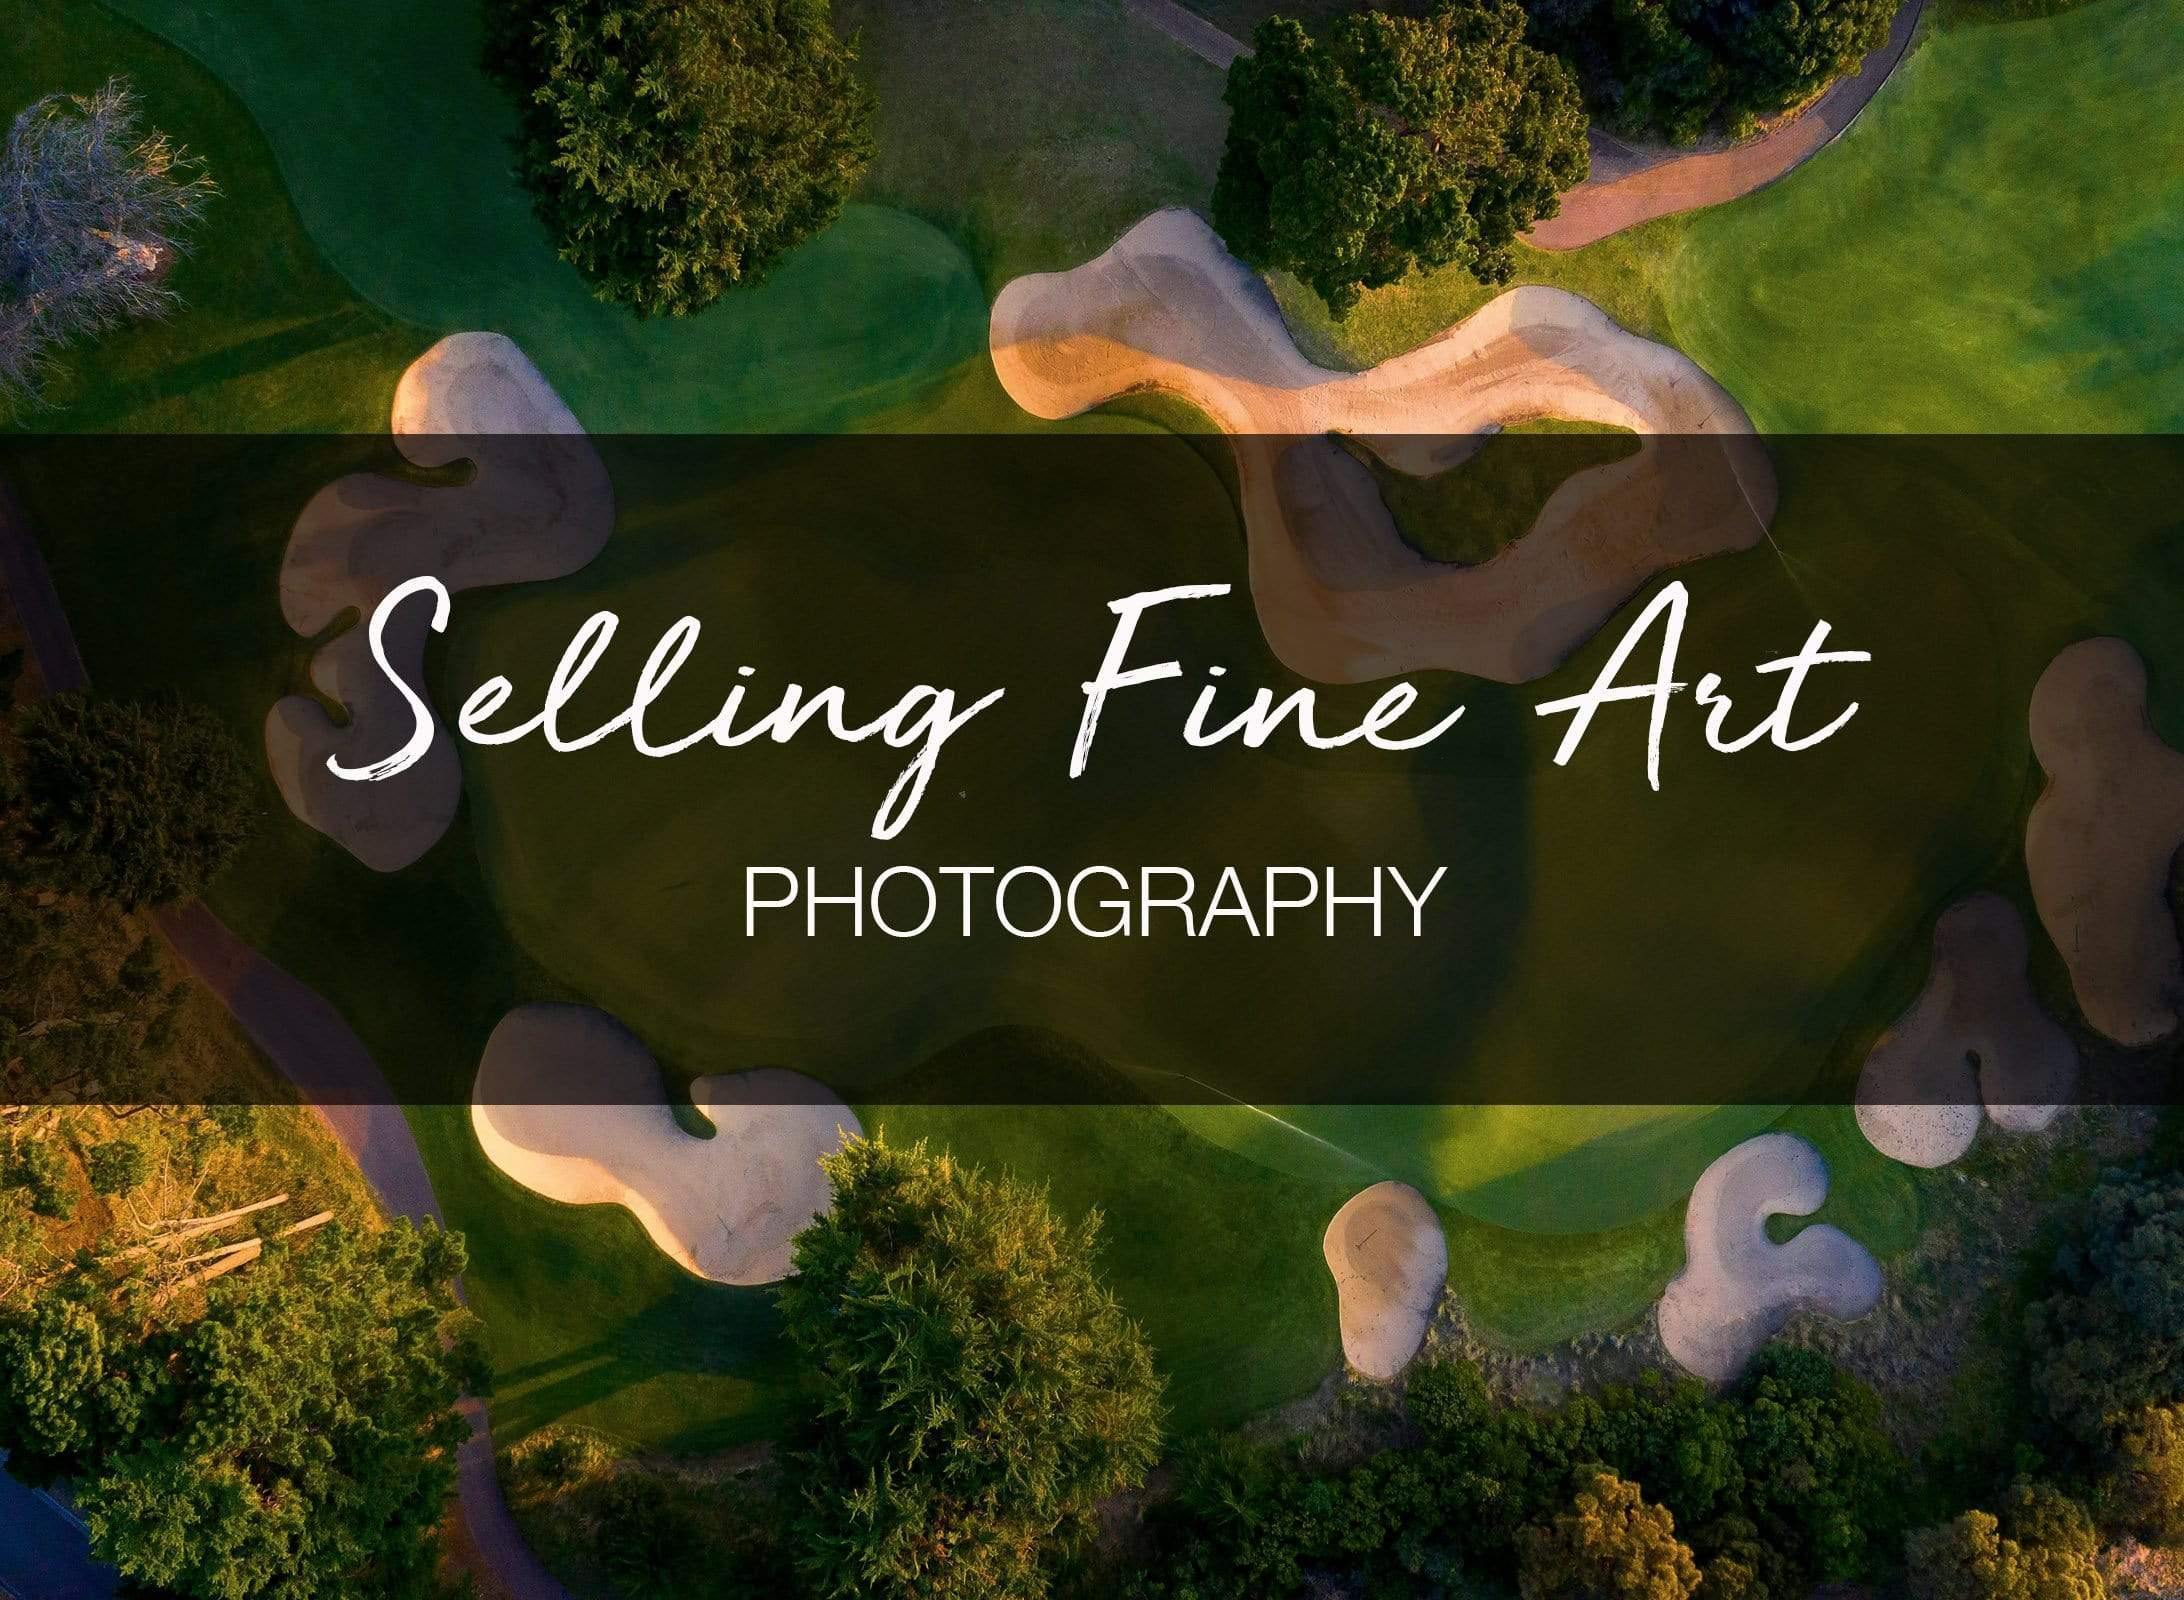 Cover of selling fine arts, Tomputt - GALLERY DISCUSSION with Cath